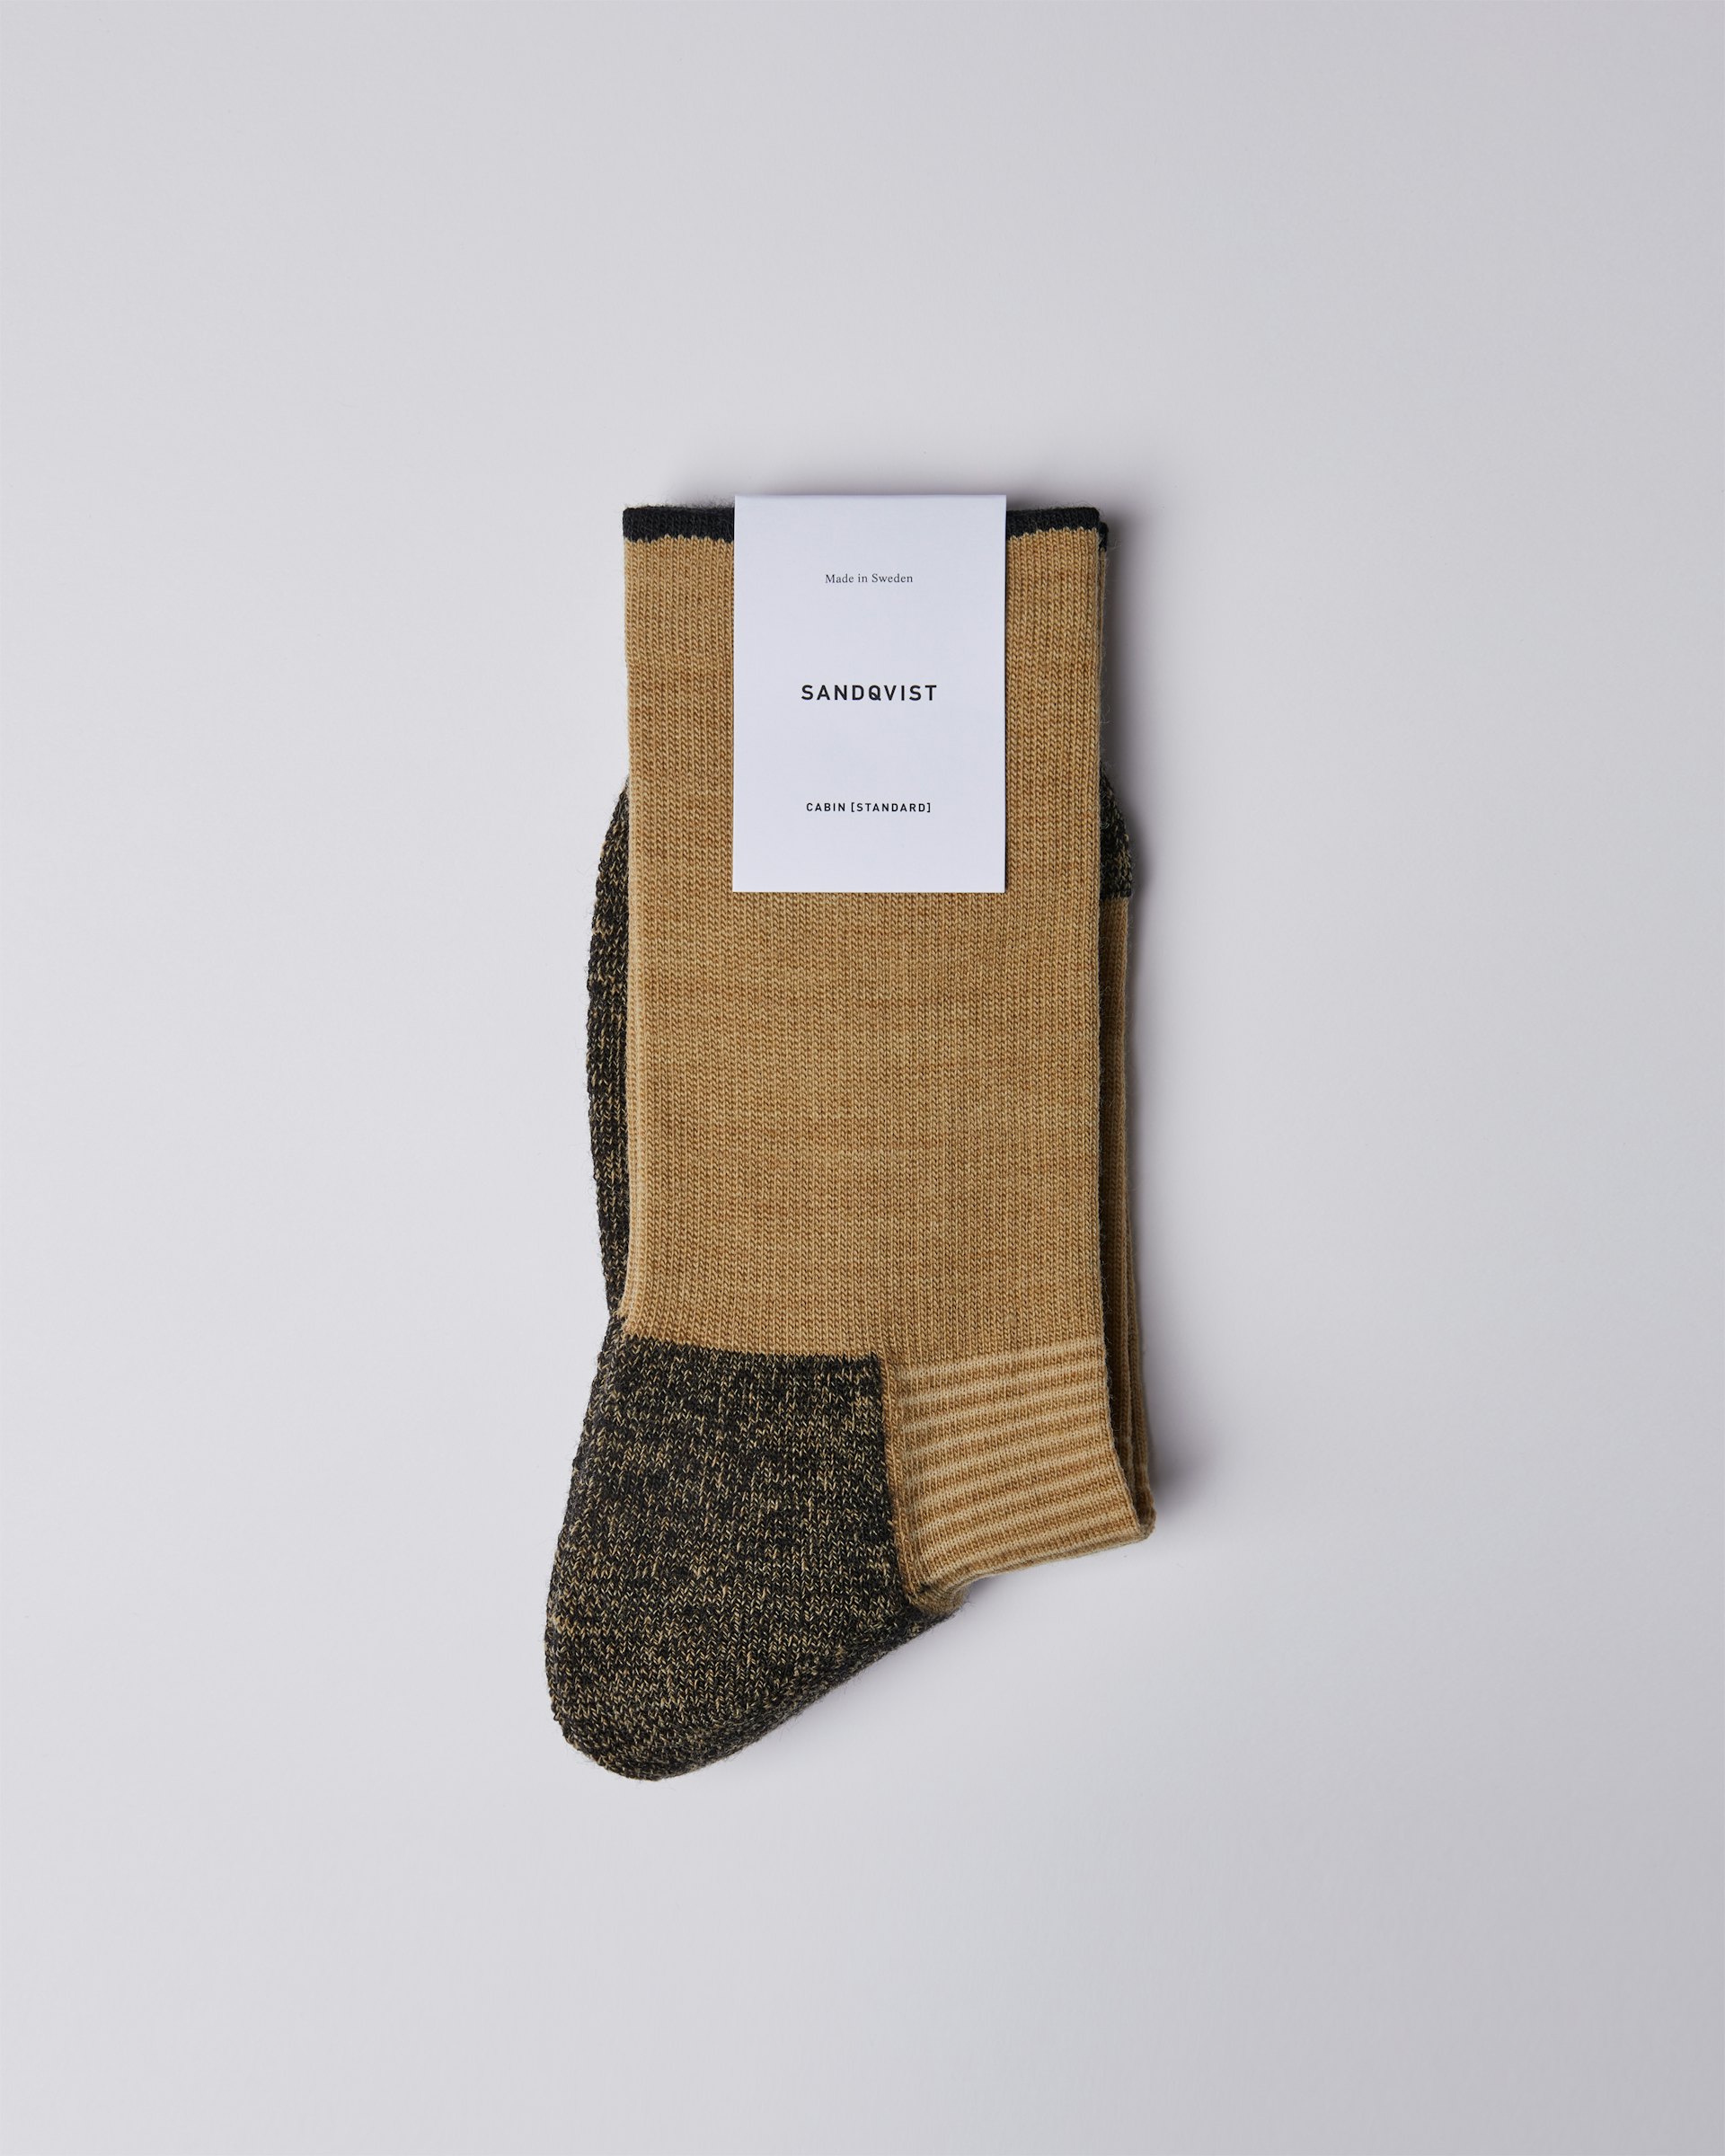 Wool sock belongs to the category Items and is in color black & bronze (1 of 3)